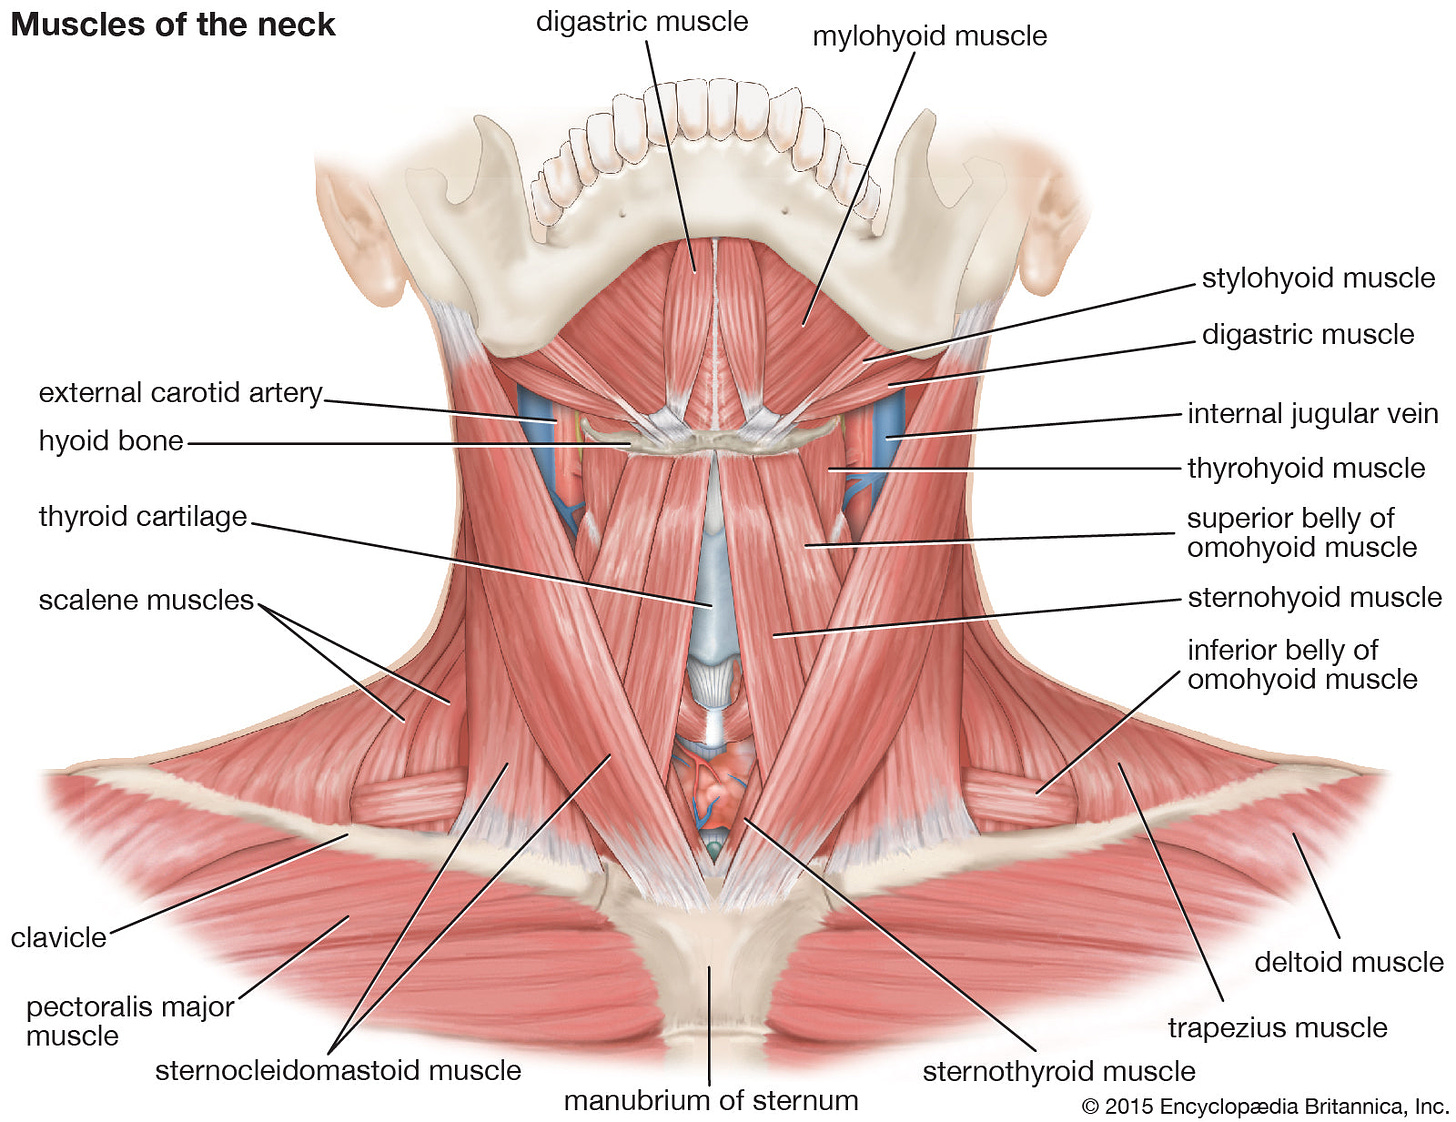 Major Muscles of the Neck – Iron Neck UK & Europe